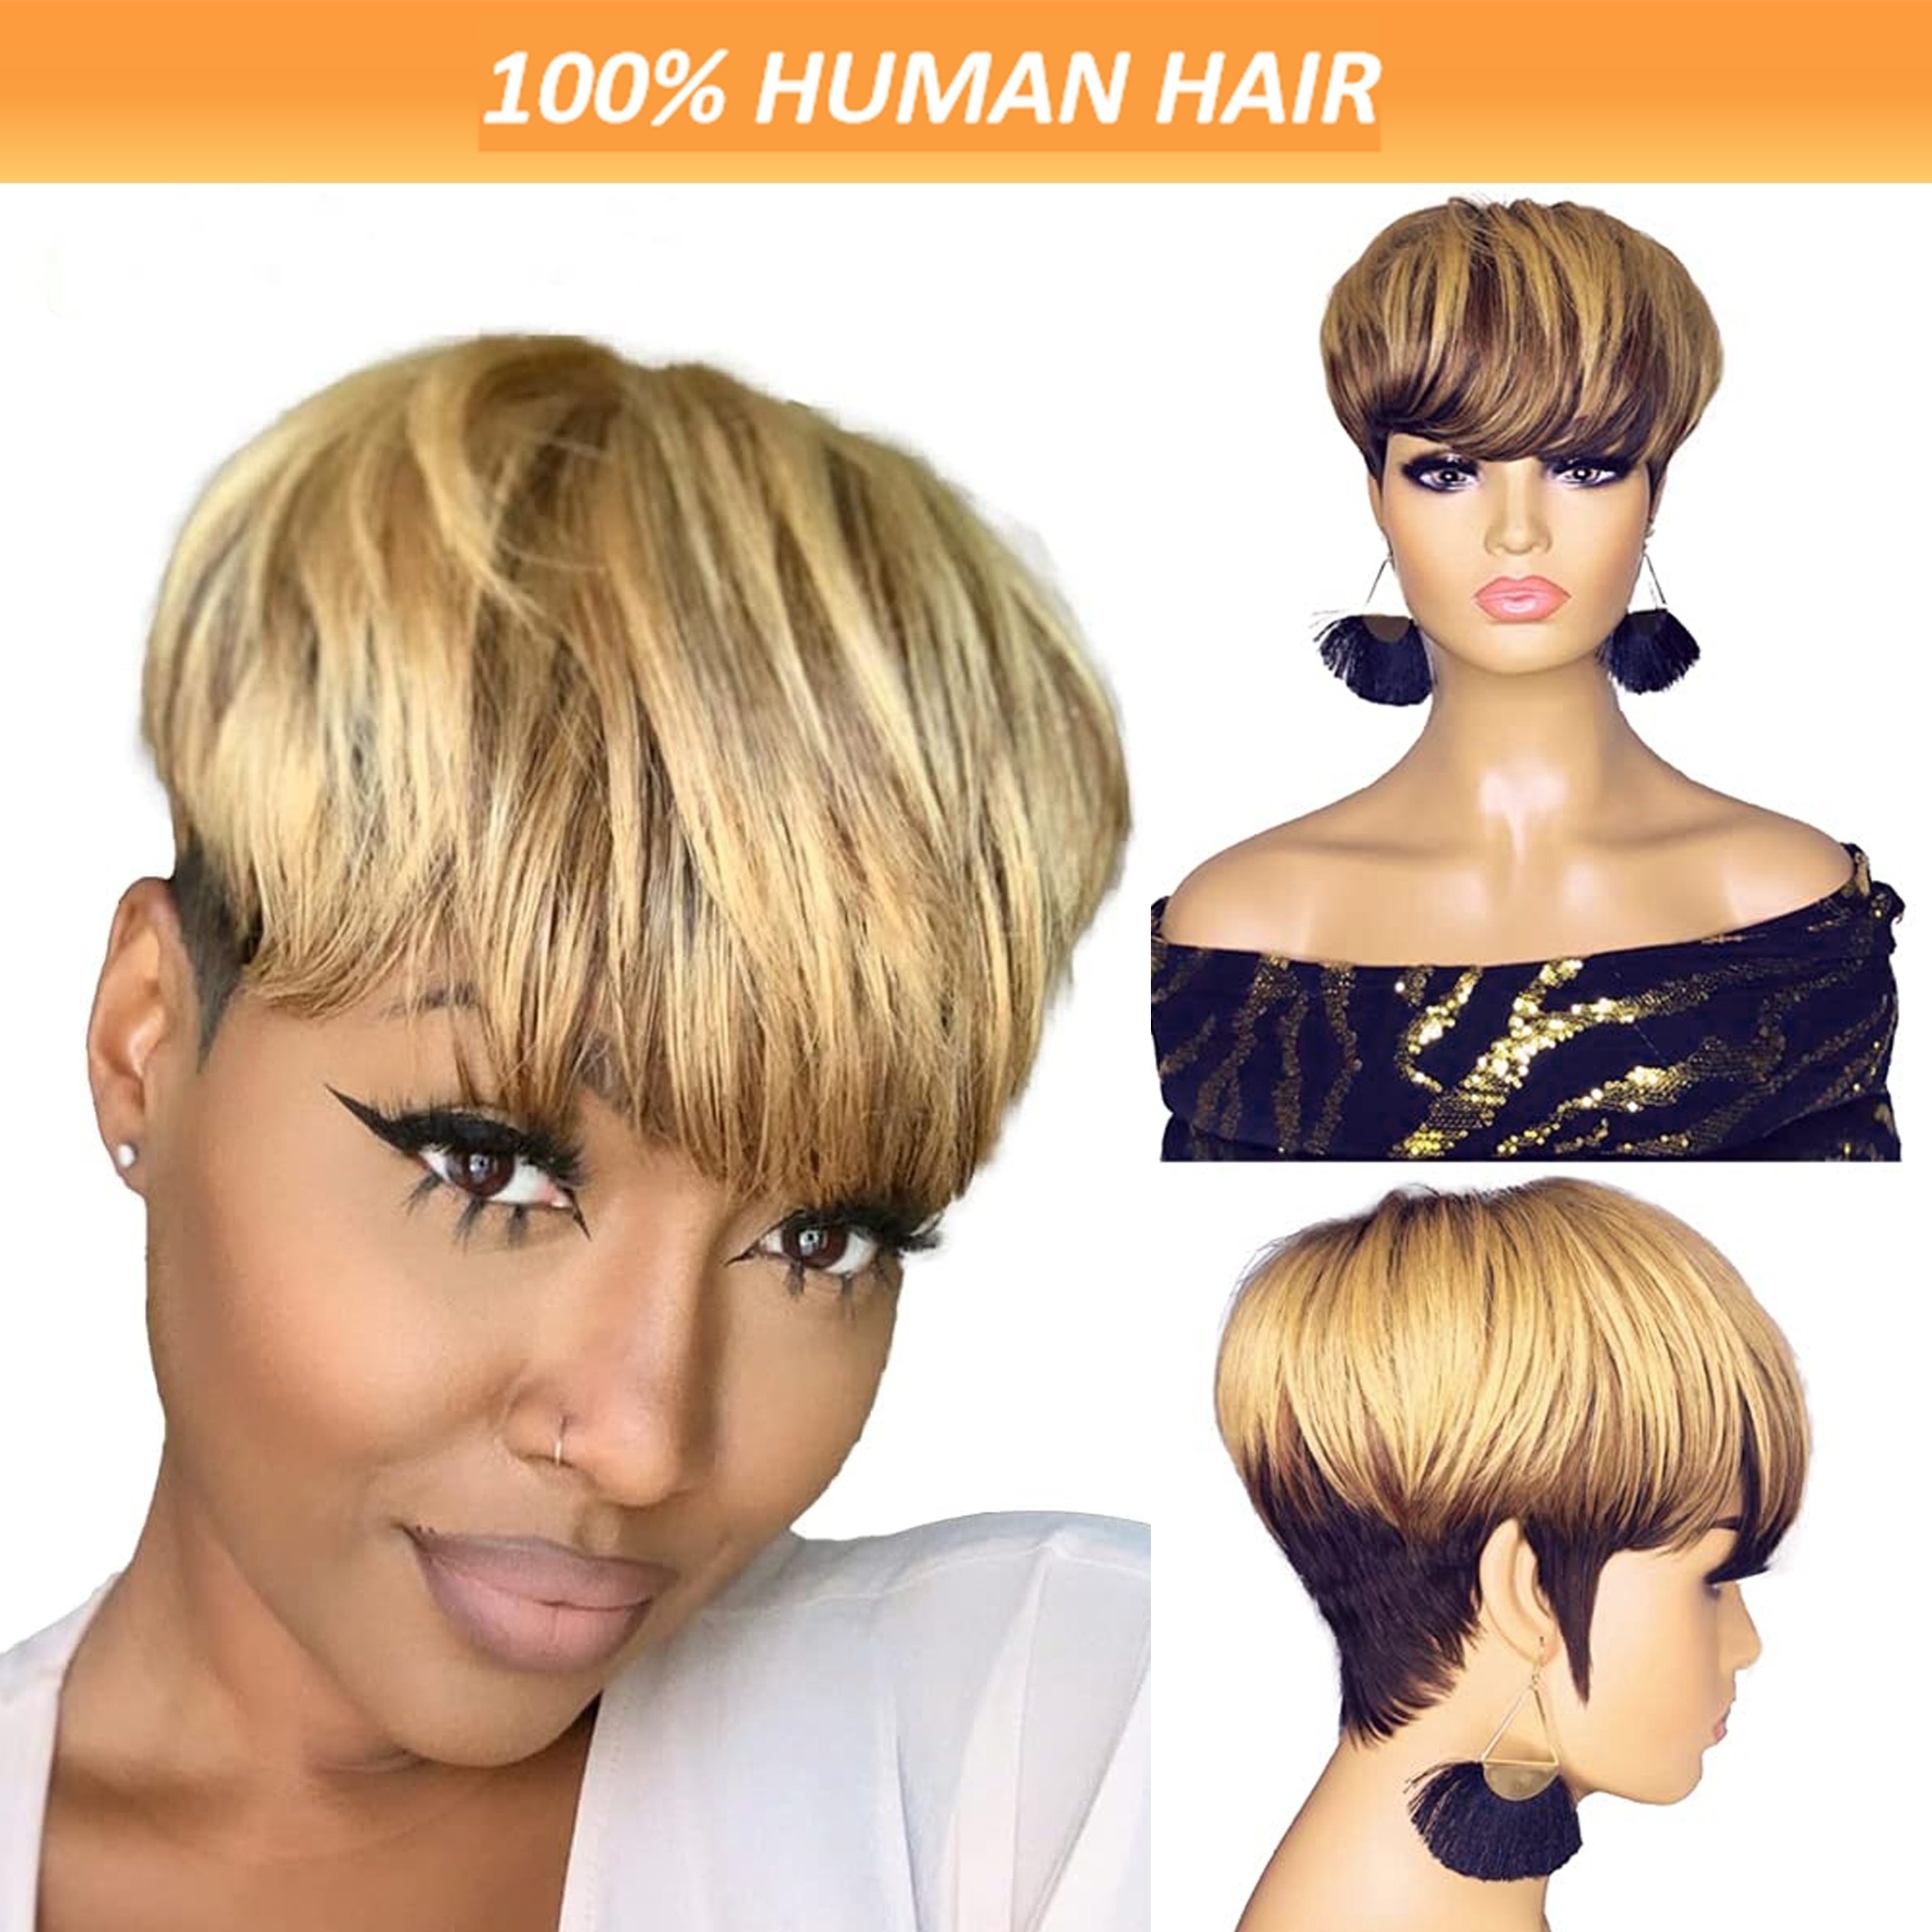 

6 Inch Human Hair 150% Density Pixie Hair Cut Black For Women Short Bob Wigs Human Hair Ombre No Lace Front Wigs With Bangs Full Machine Made Wigs Brazilian Remy Human Hair Wigs